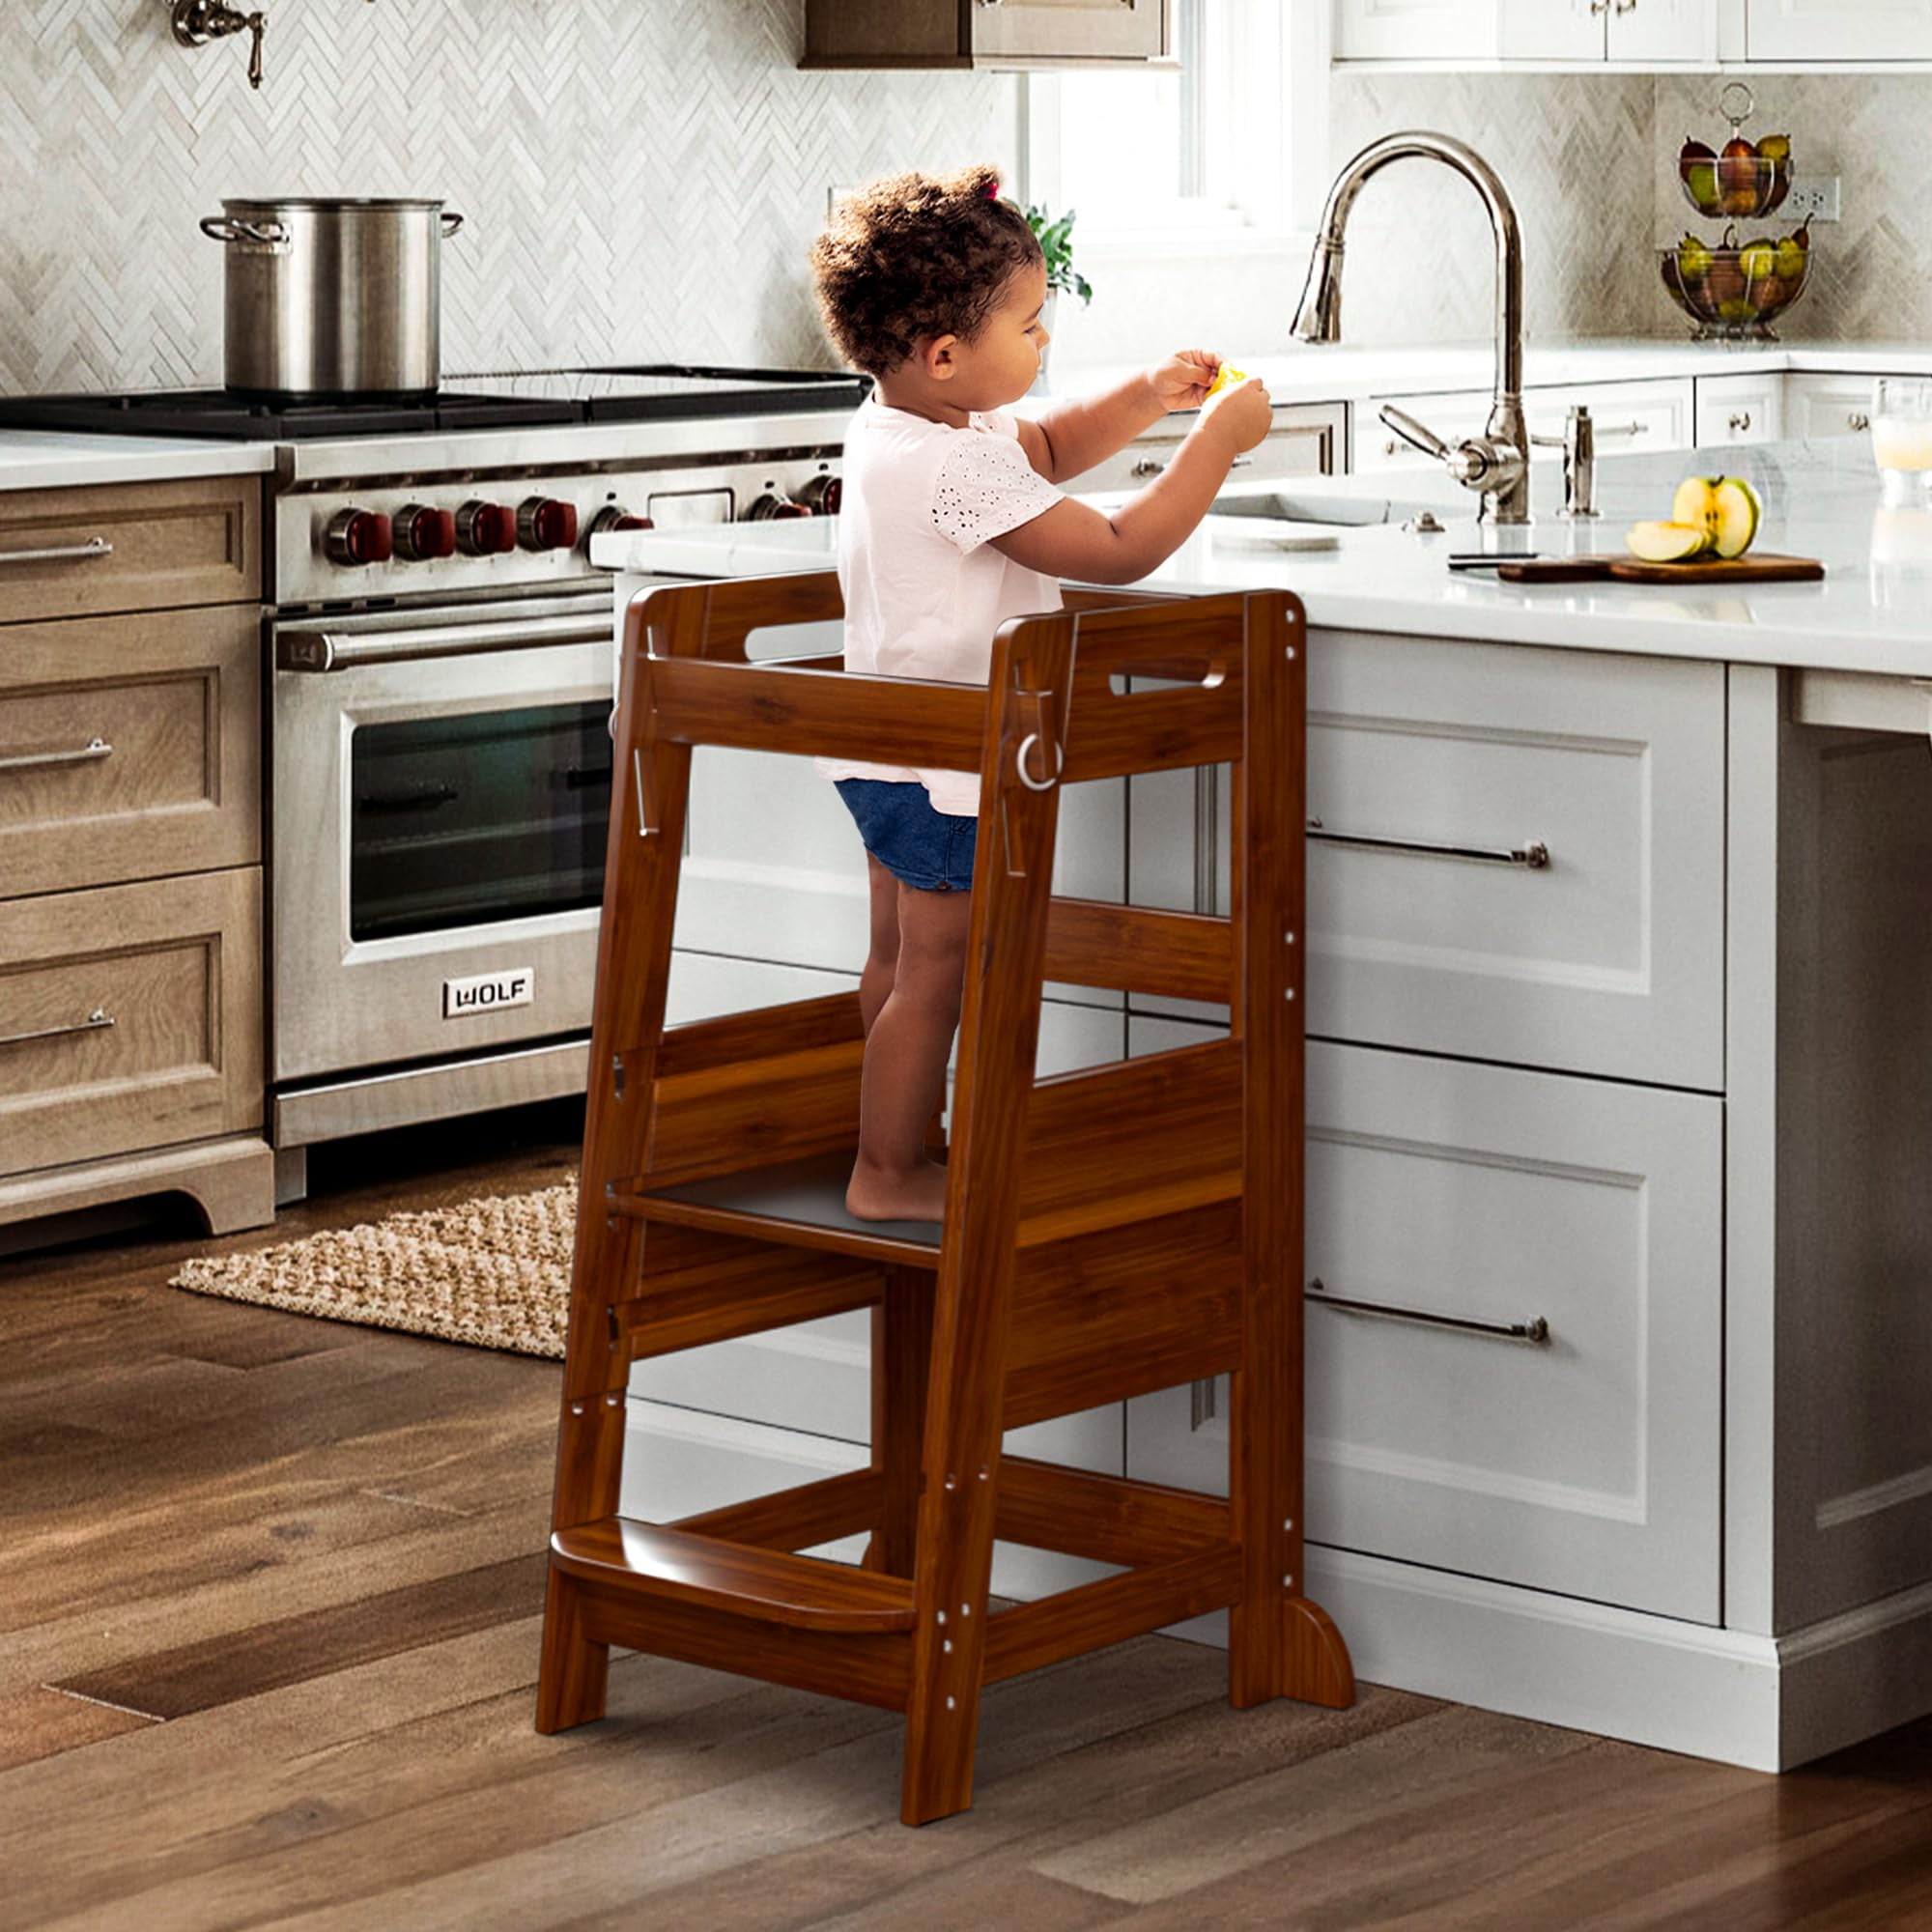 CORE PACIFIC Kitchen Buddy 2-in-1 Stool for Ages 1-3 safe up to 100 lbs. 